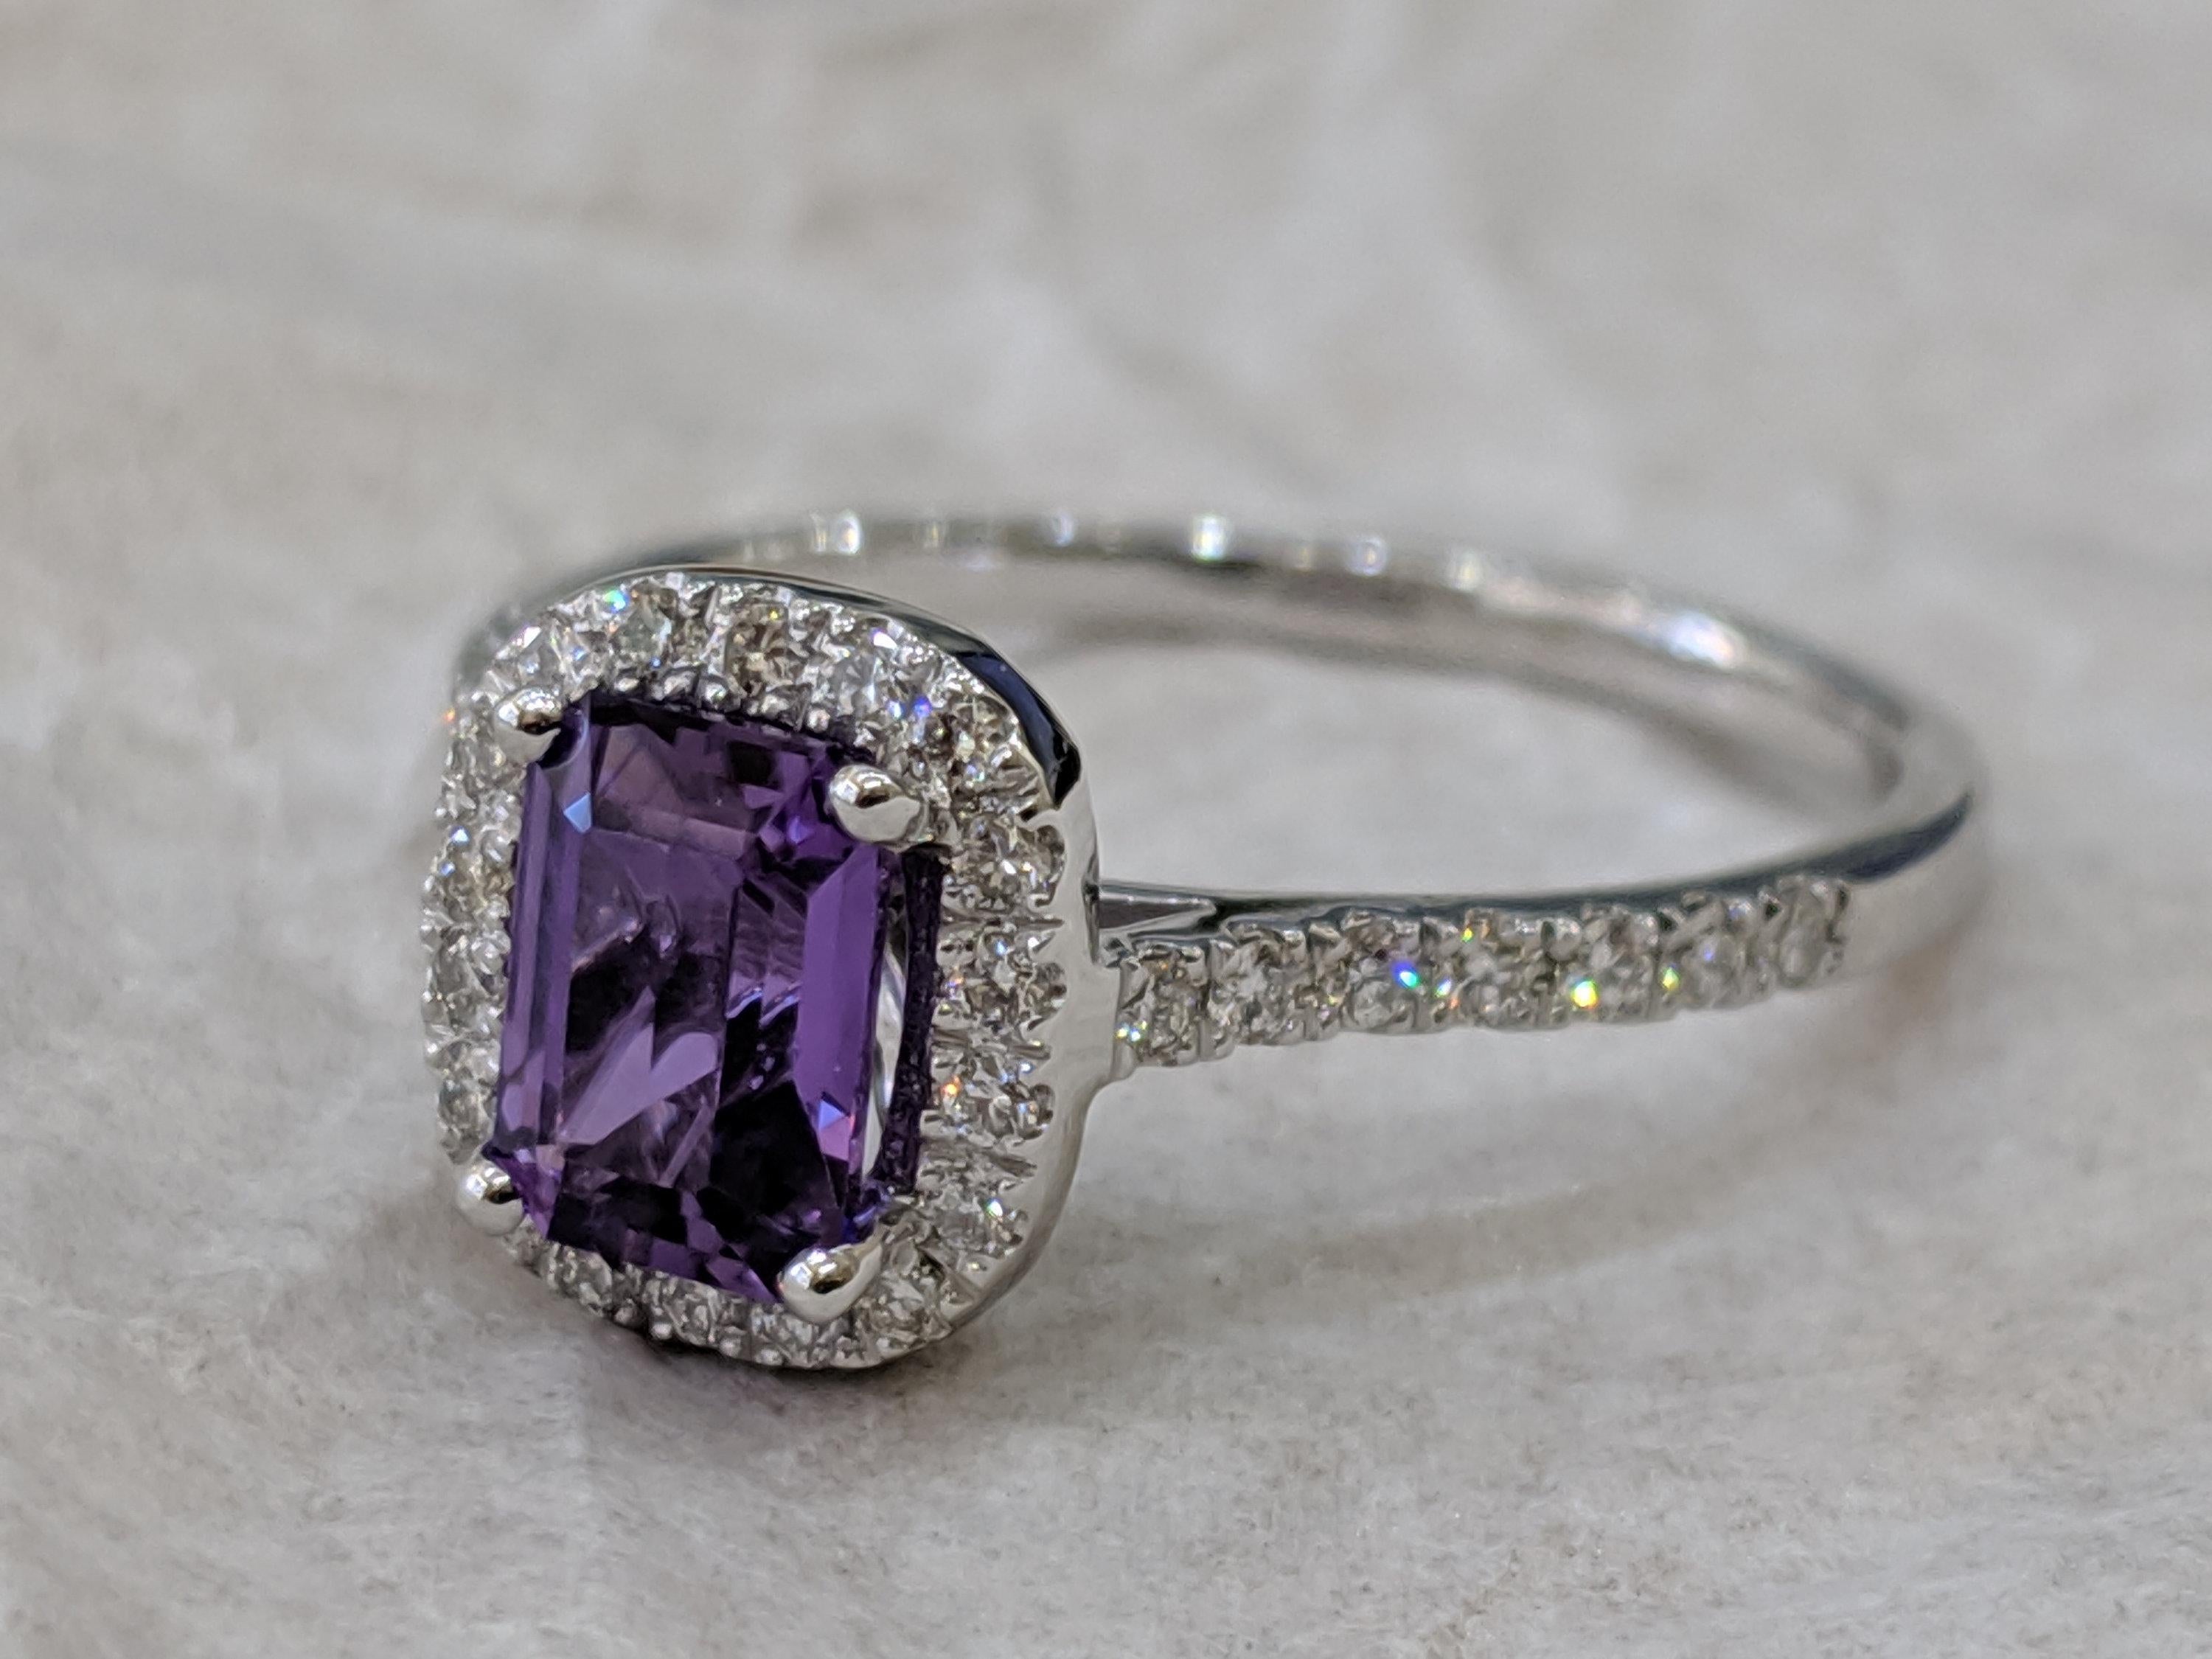 This contemporary Purple Sapphire ring is made of 14k white gold with Emerald -cut central Sapphire of 1.25 carats with Violet natural color, gently holded by prongs above a circle of small white diamonds, making this jewelry unique. This high